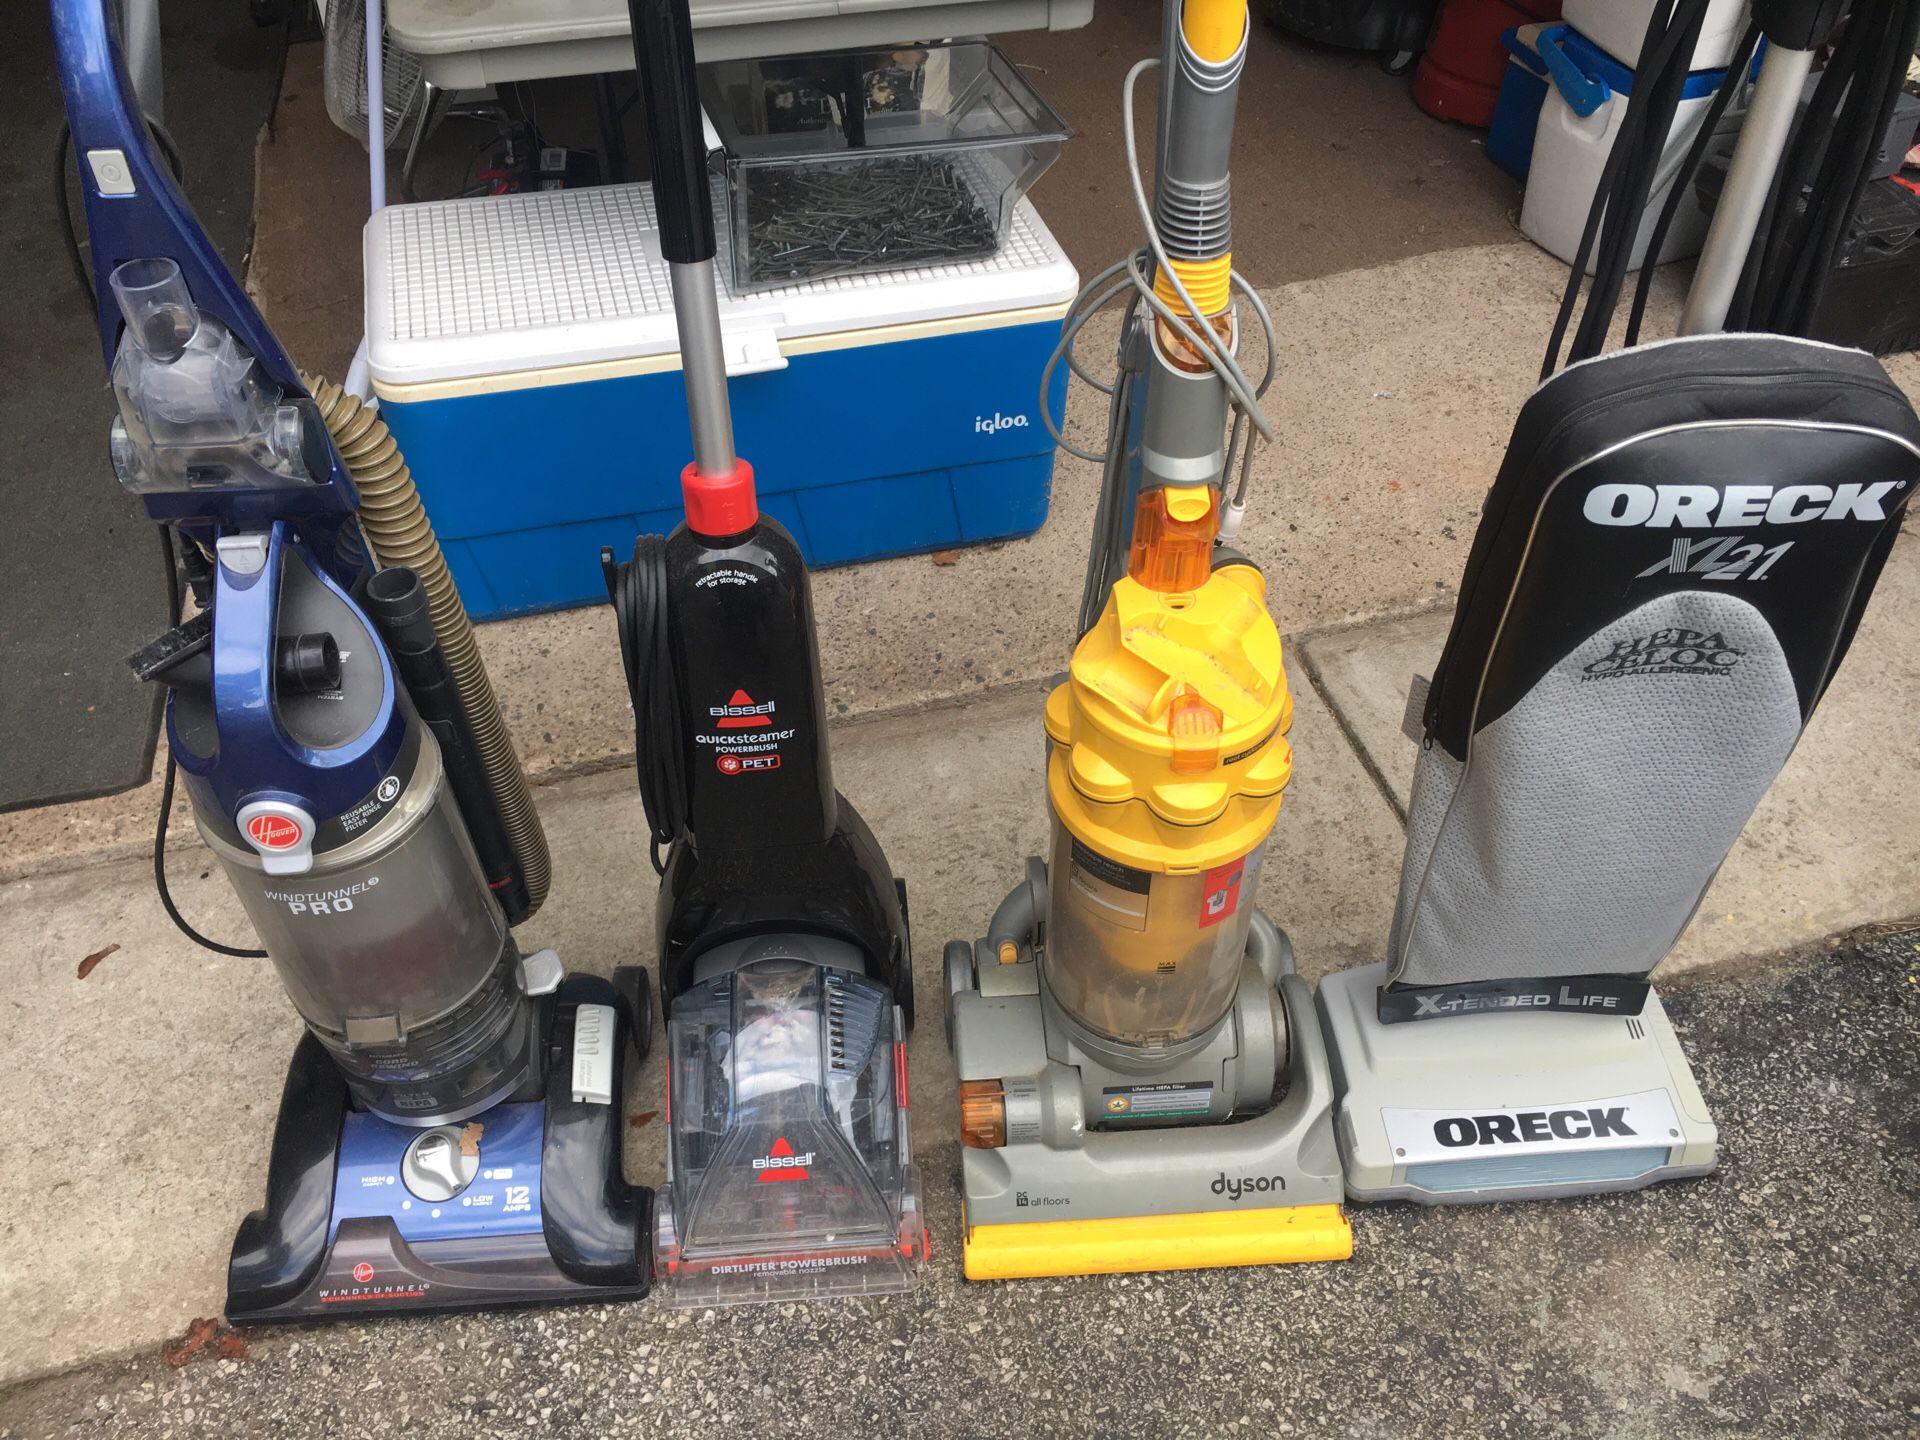 Vacuum for oreck Dyson Hoover Bissell Shampooer or for $150 or sell separate